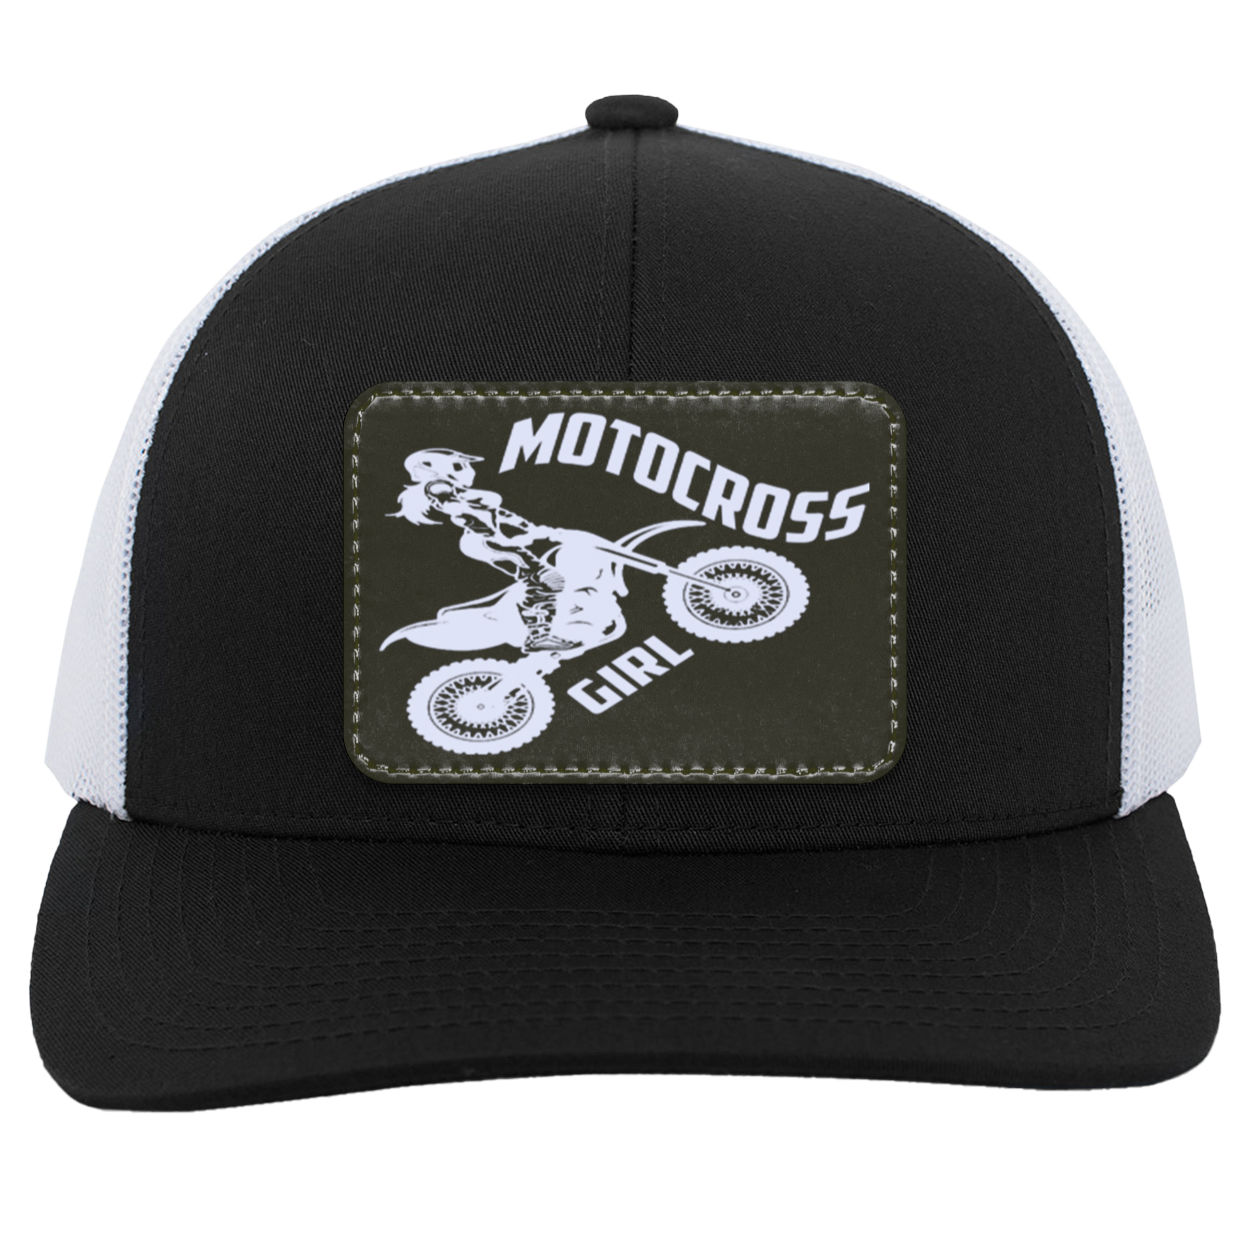 Motocross Girl Trucker Patched Snap Back